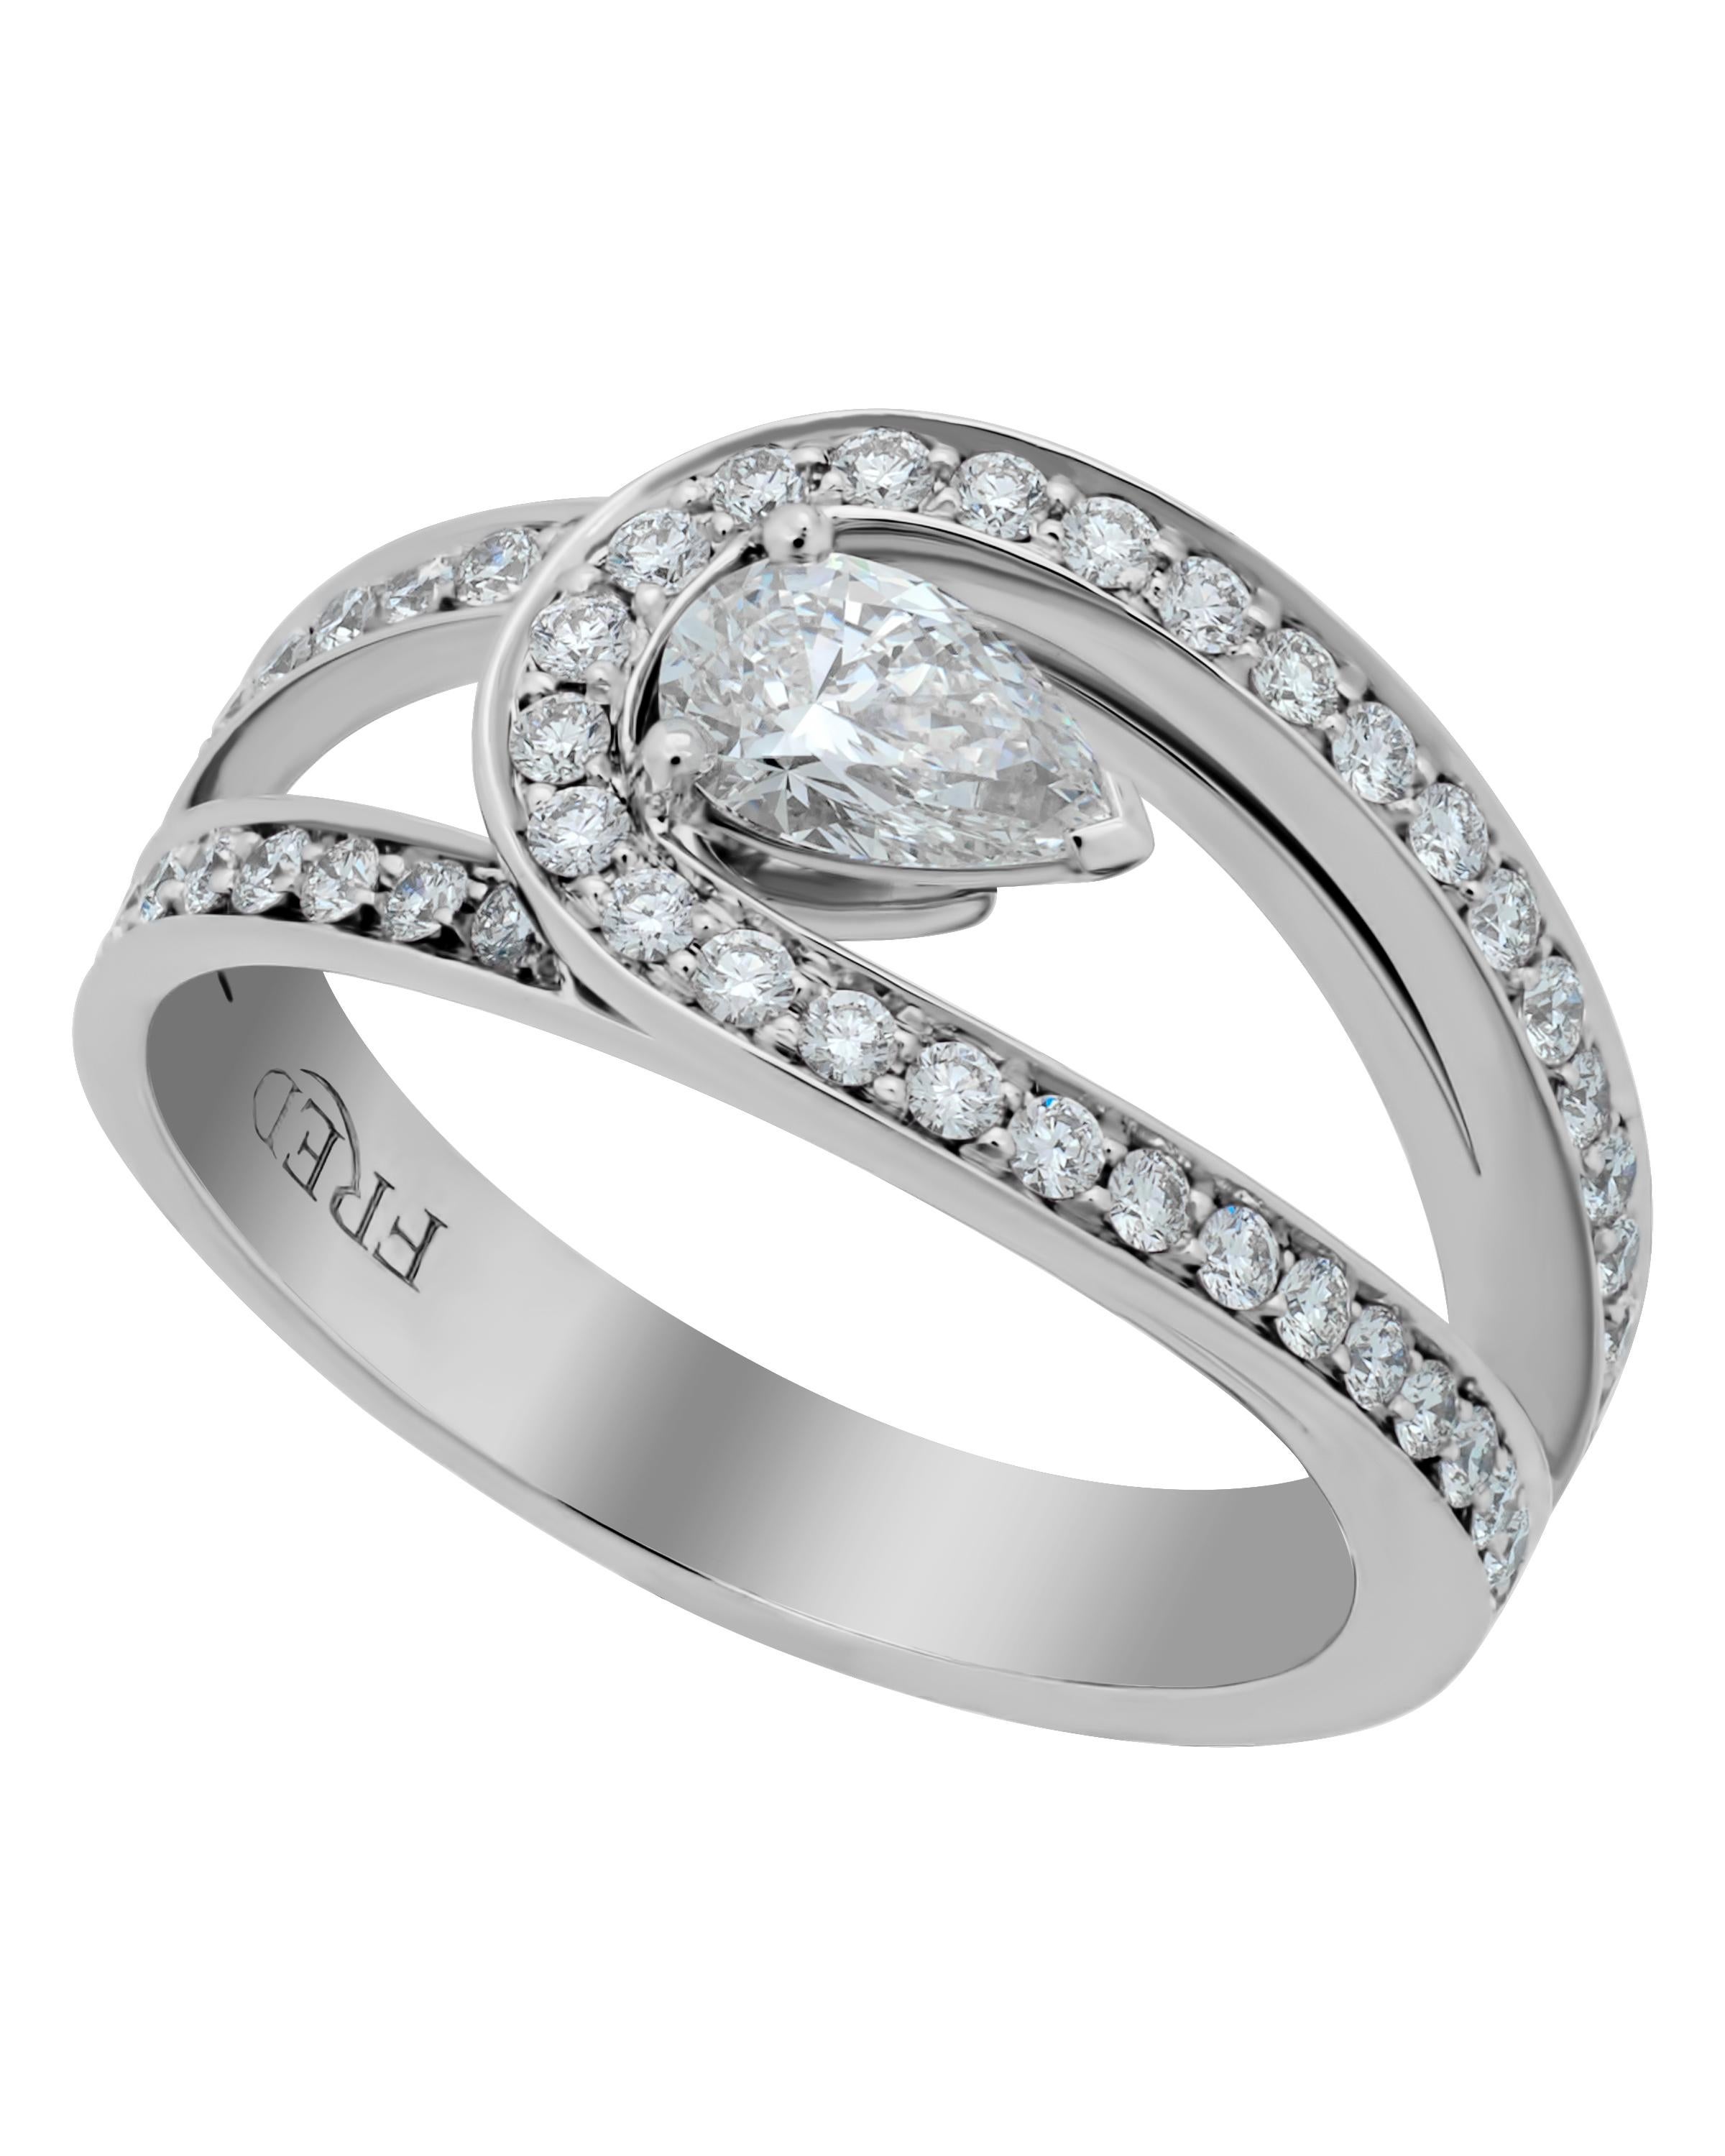 FRED Lovelight platinum engagement ring features a GIA certified 0.30ct. pear cut diamond center with color and clarity: E, VS2 adorned with 0.55ct. tw. pavé diamonds. The ring size is 6 (51.9). The weight is 8.5g.
